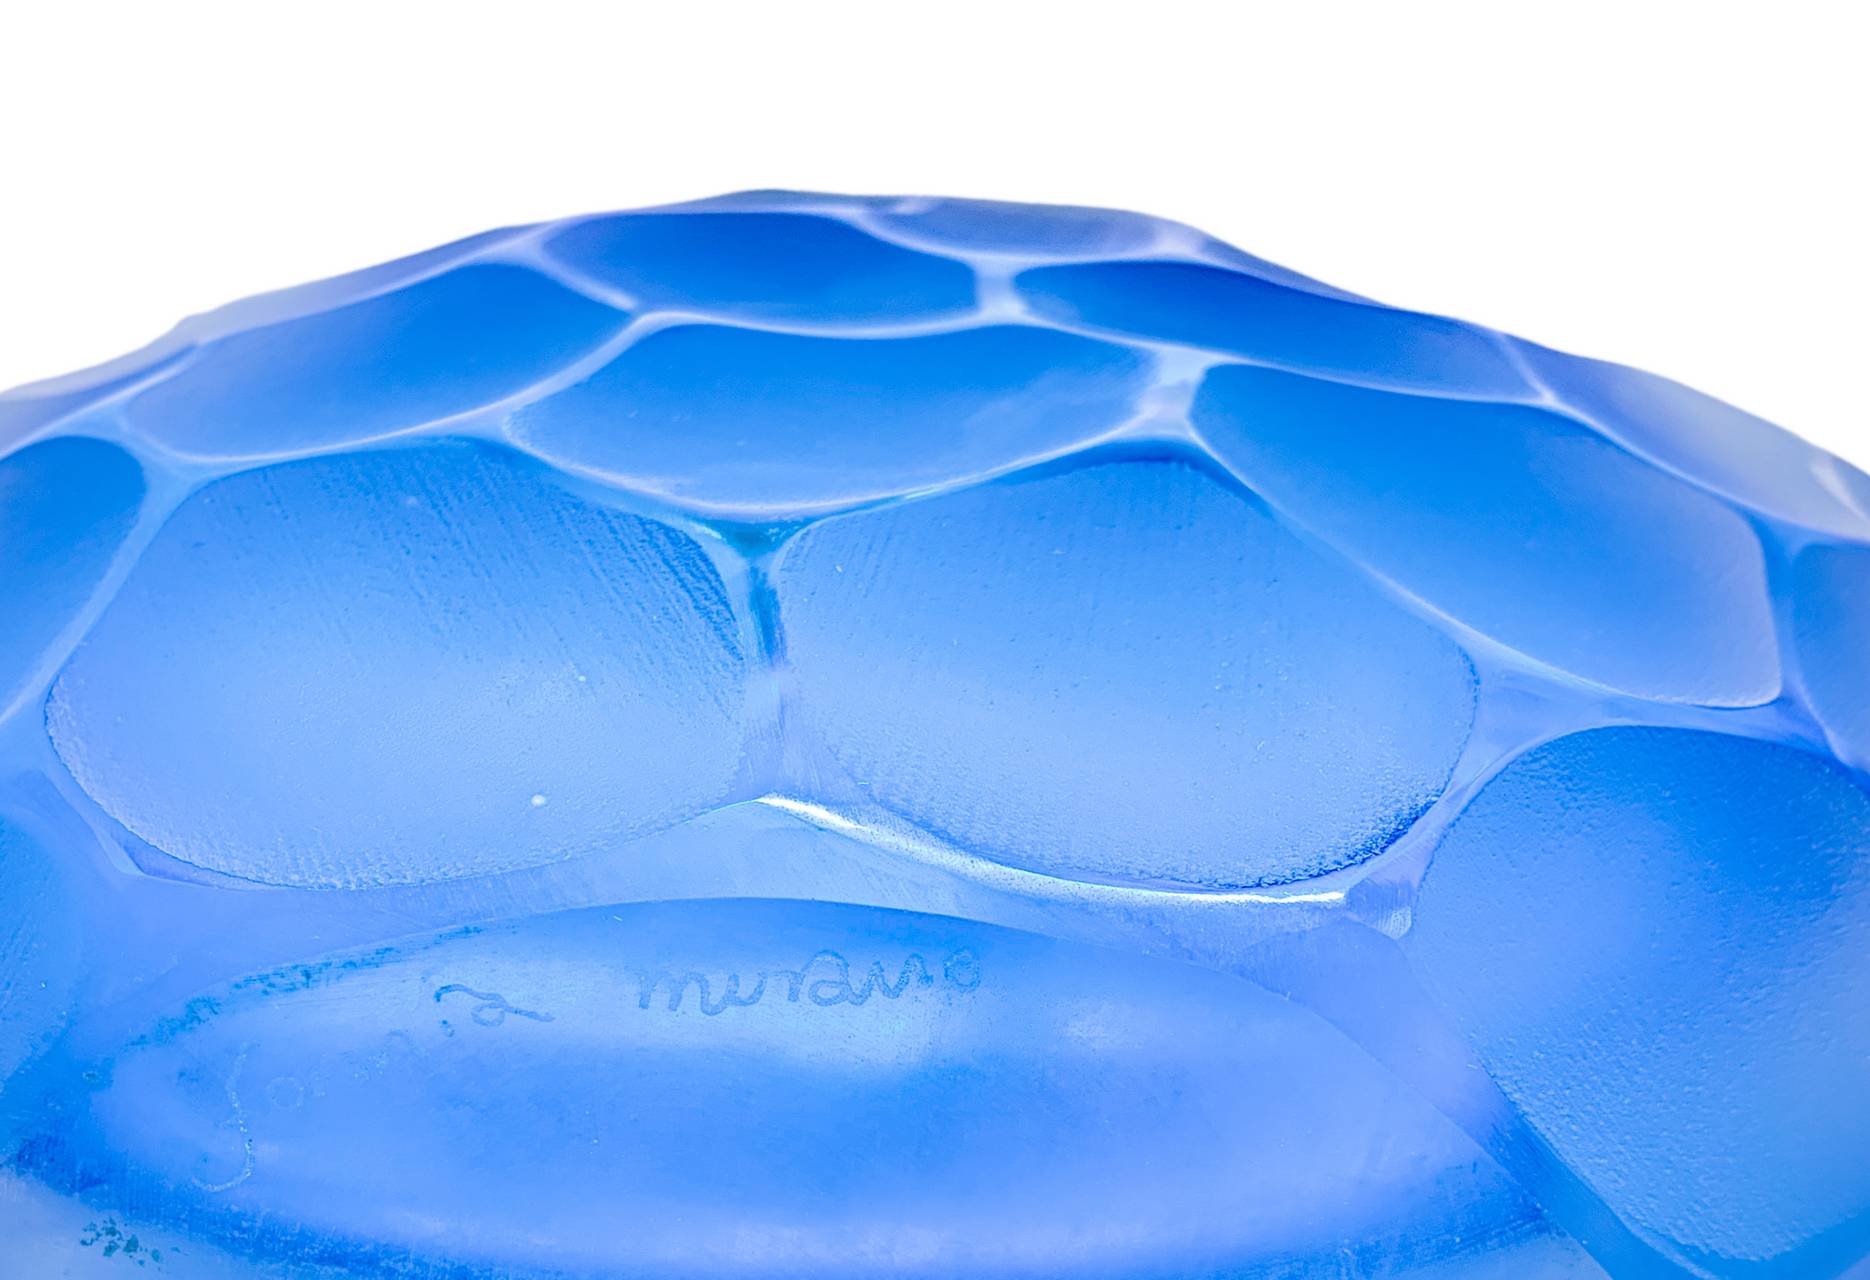 Glass jar submerged globular form in the blue and blue tones, grinded surface and veiled. Murano Gla - Image 7 of 7